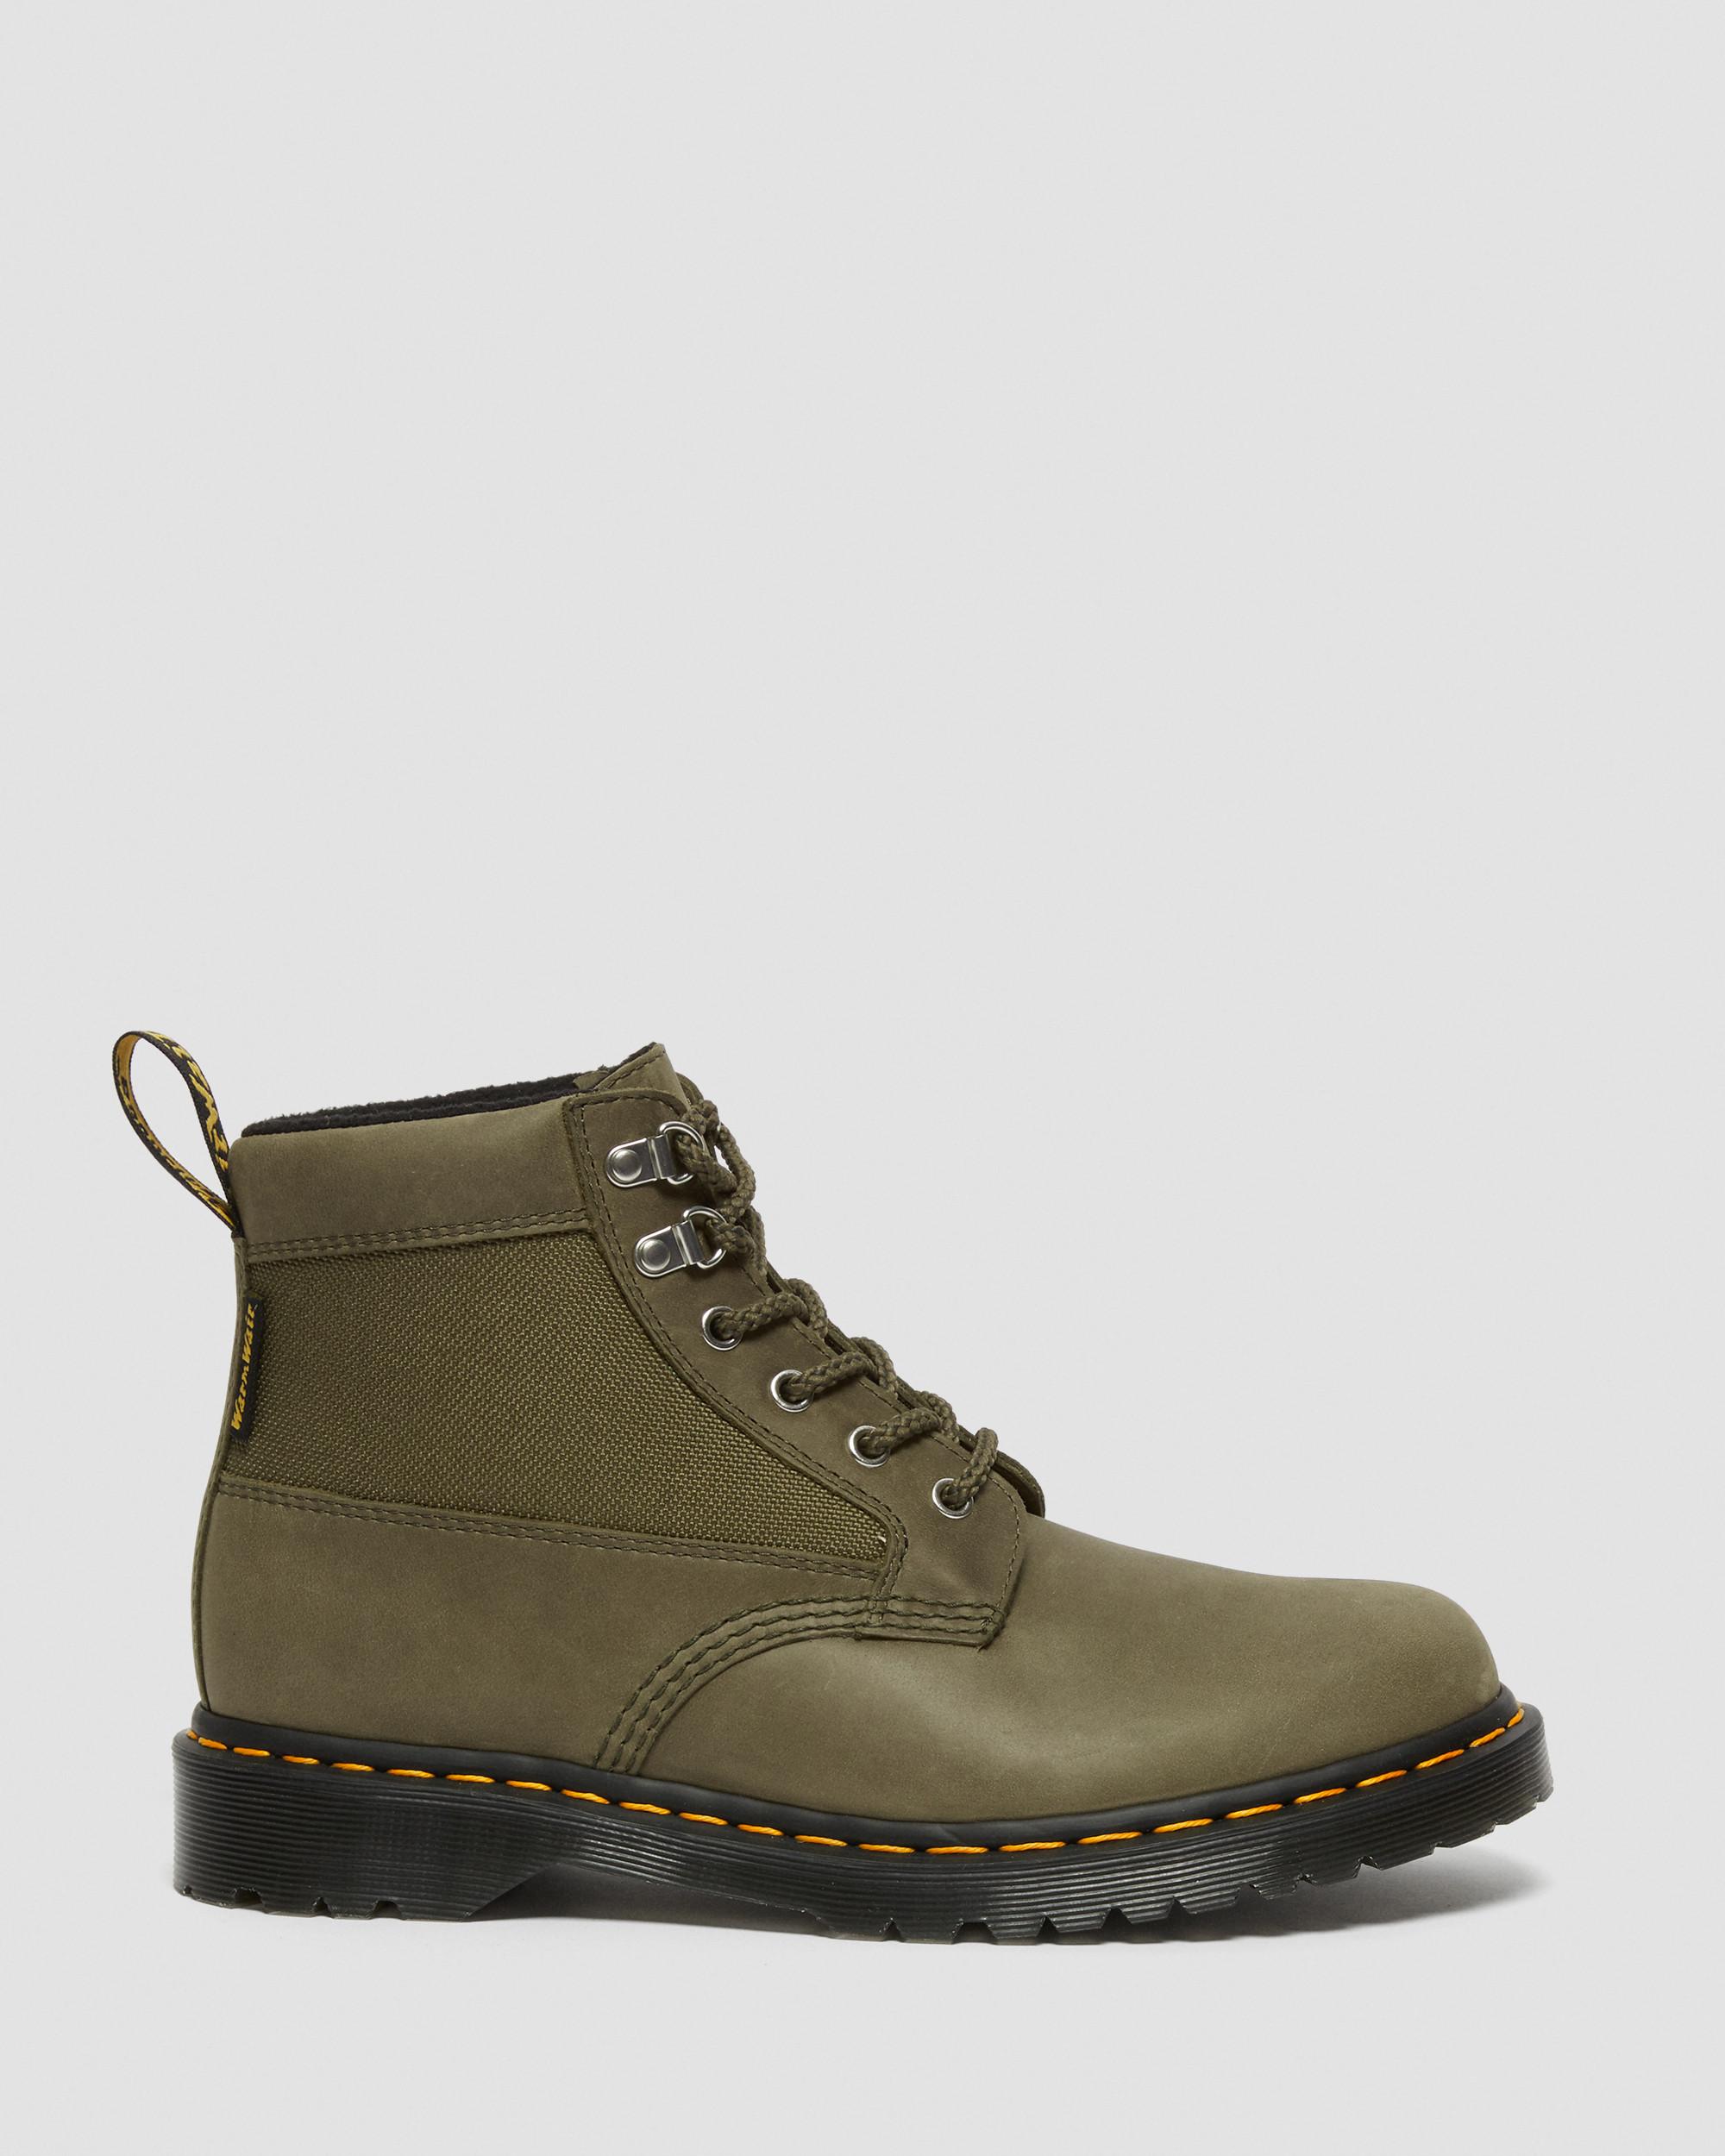 101 Olive Streeter Extra Tough Ankle BootsStivaletti 101 Streeter Dr. Martens